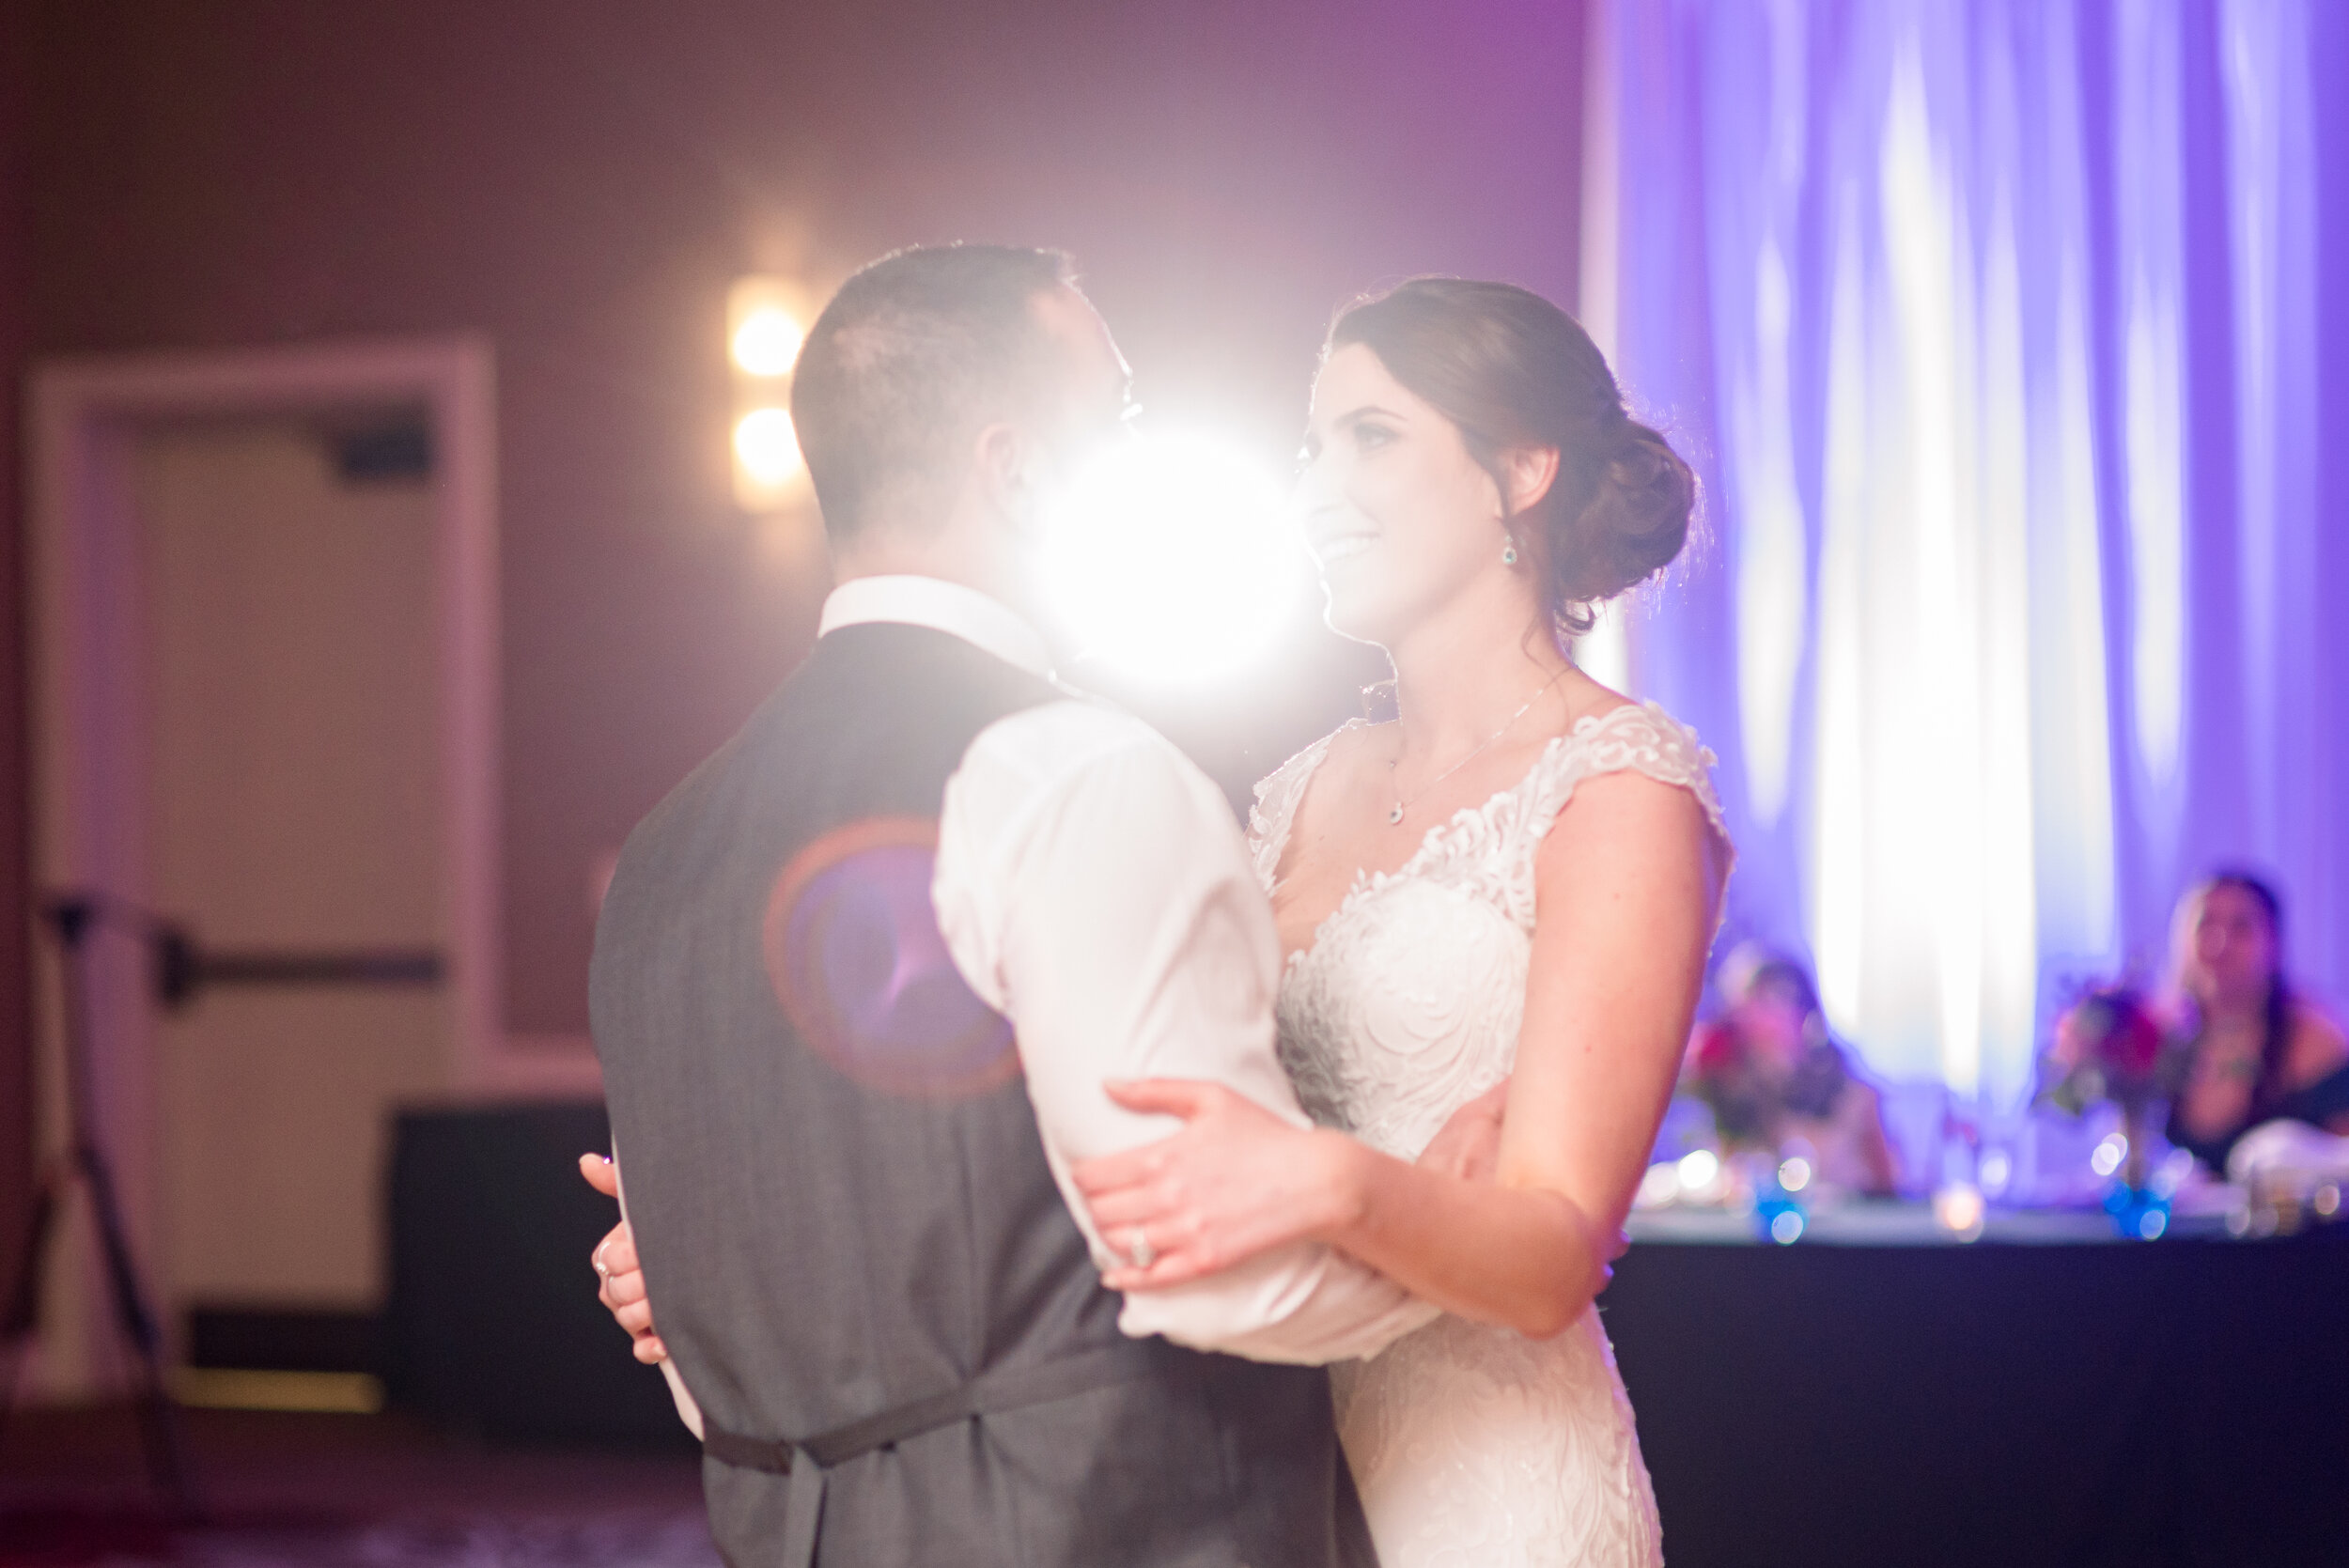 Weddings-at-The-DoubleTree-by-Hilton-Hotel-Pittsburgh-Ashley-Reed-Photography-65.jpg